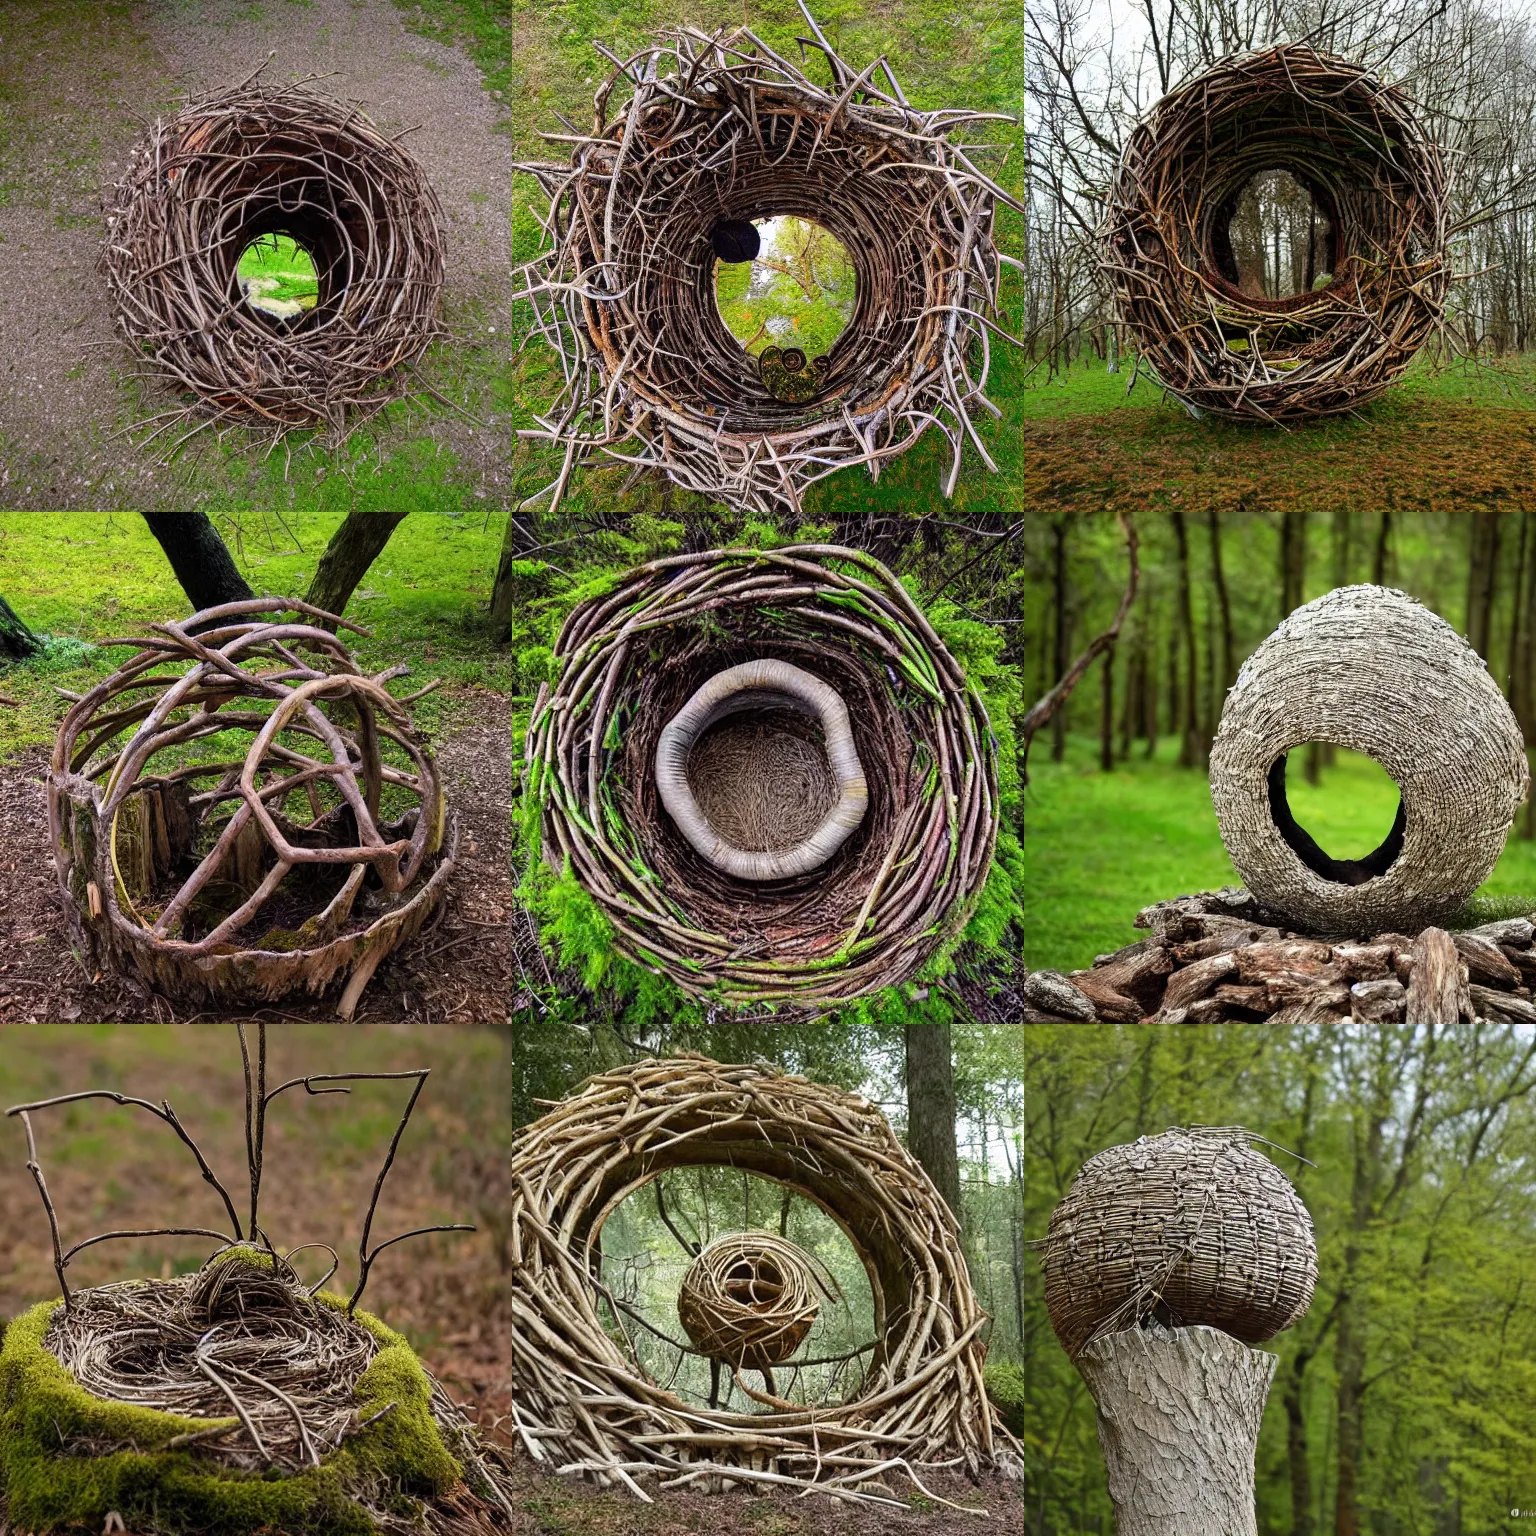 Prompt: an environment art sculpture by Nils-Udo, leaves twigs wood, nature, natural, round form, Bird nesting inside structure, leaf spiral pattern around outside of structure